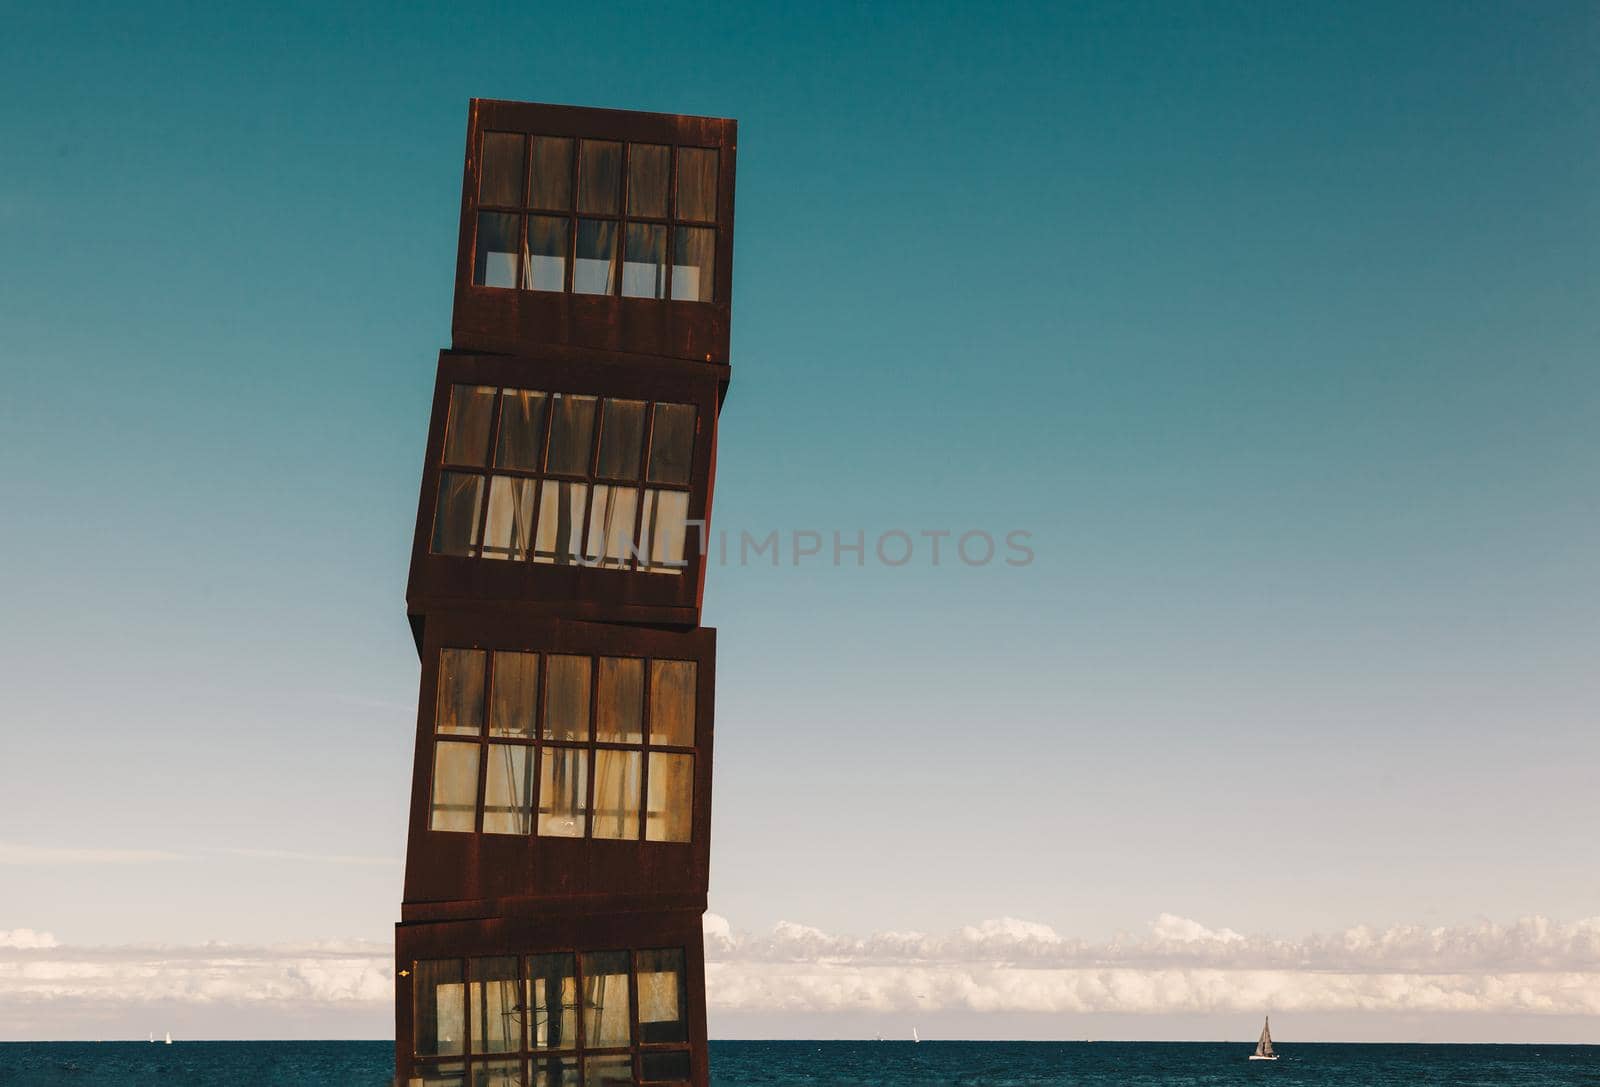 Barcelona, Spain. The sculpture designed by installation artist Rebecca Horn in COR-TEN steel presides over this urban beach